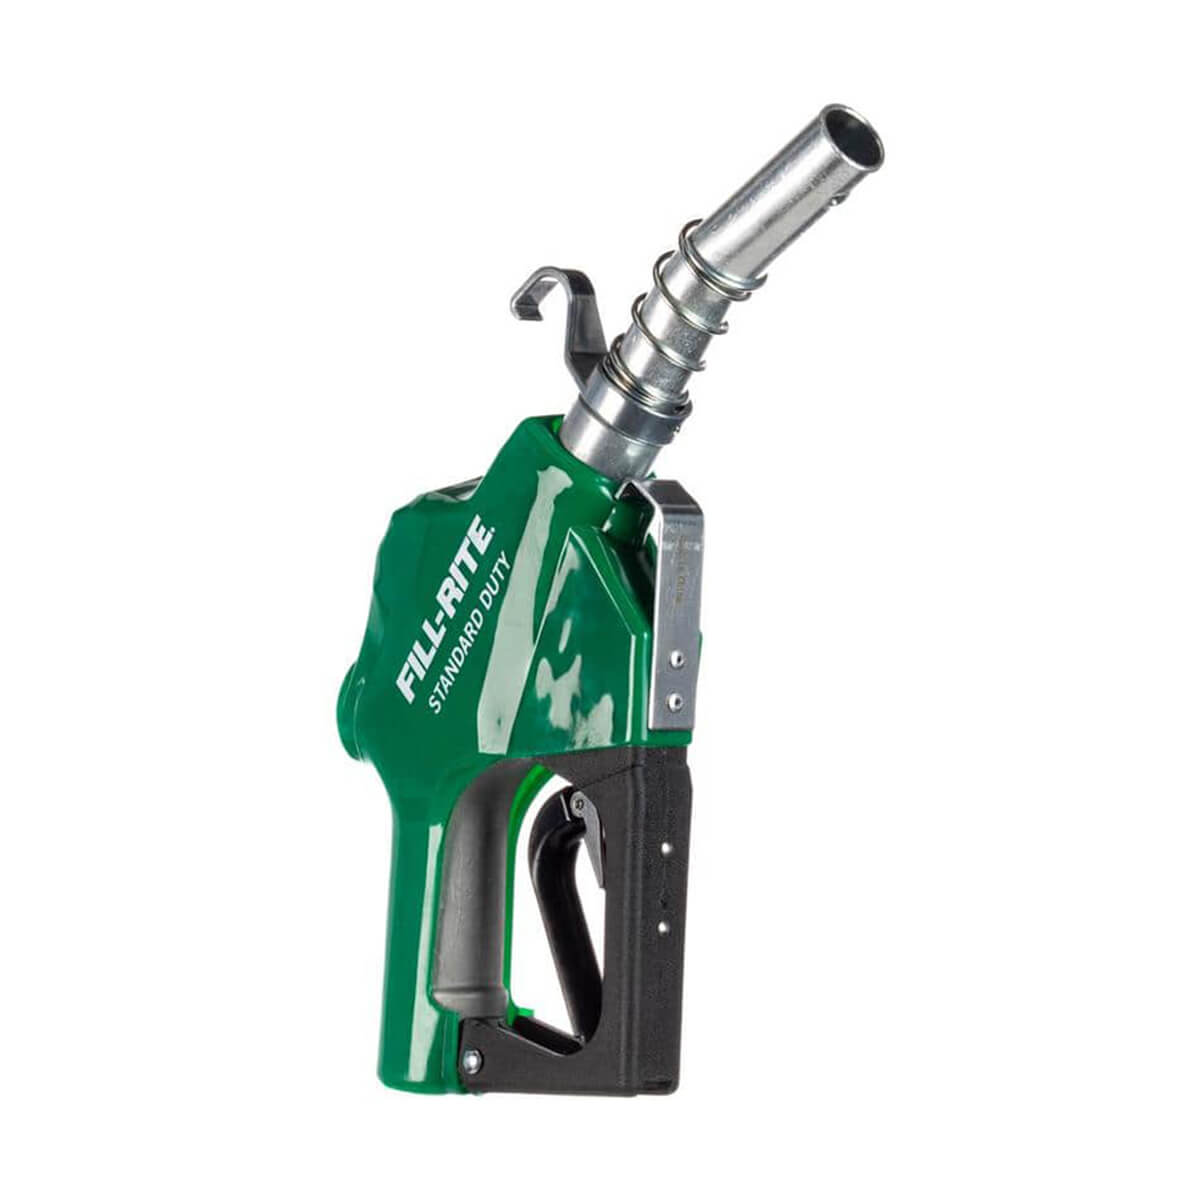 Automatic Diesel Spout Nozzle - Green - 1-in